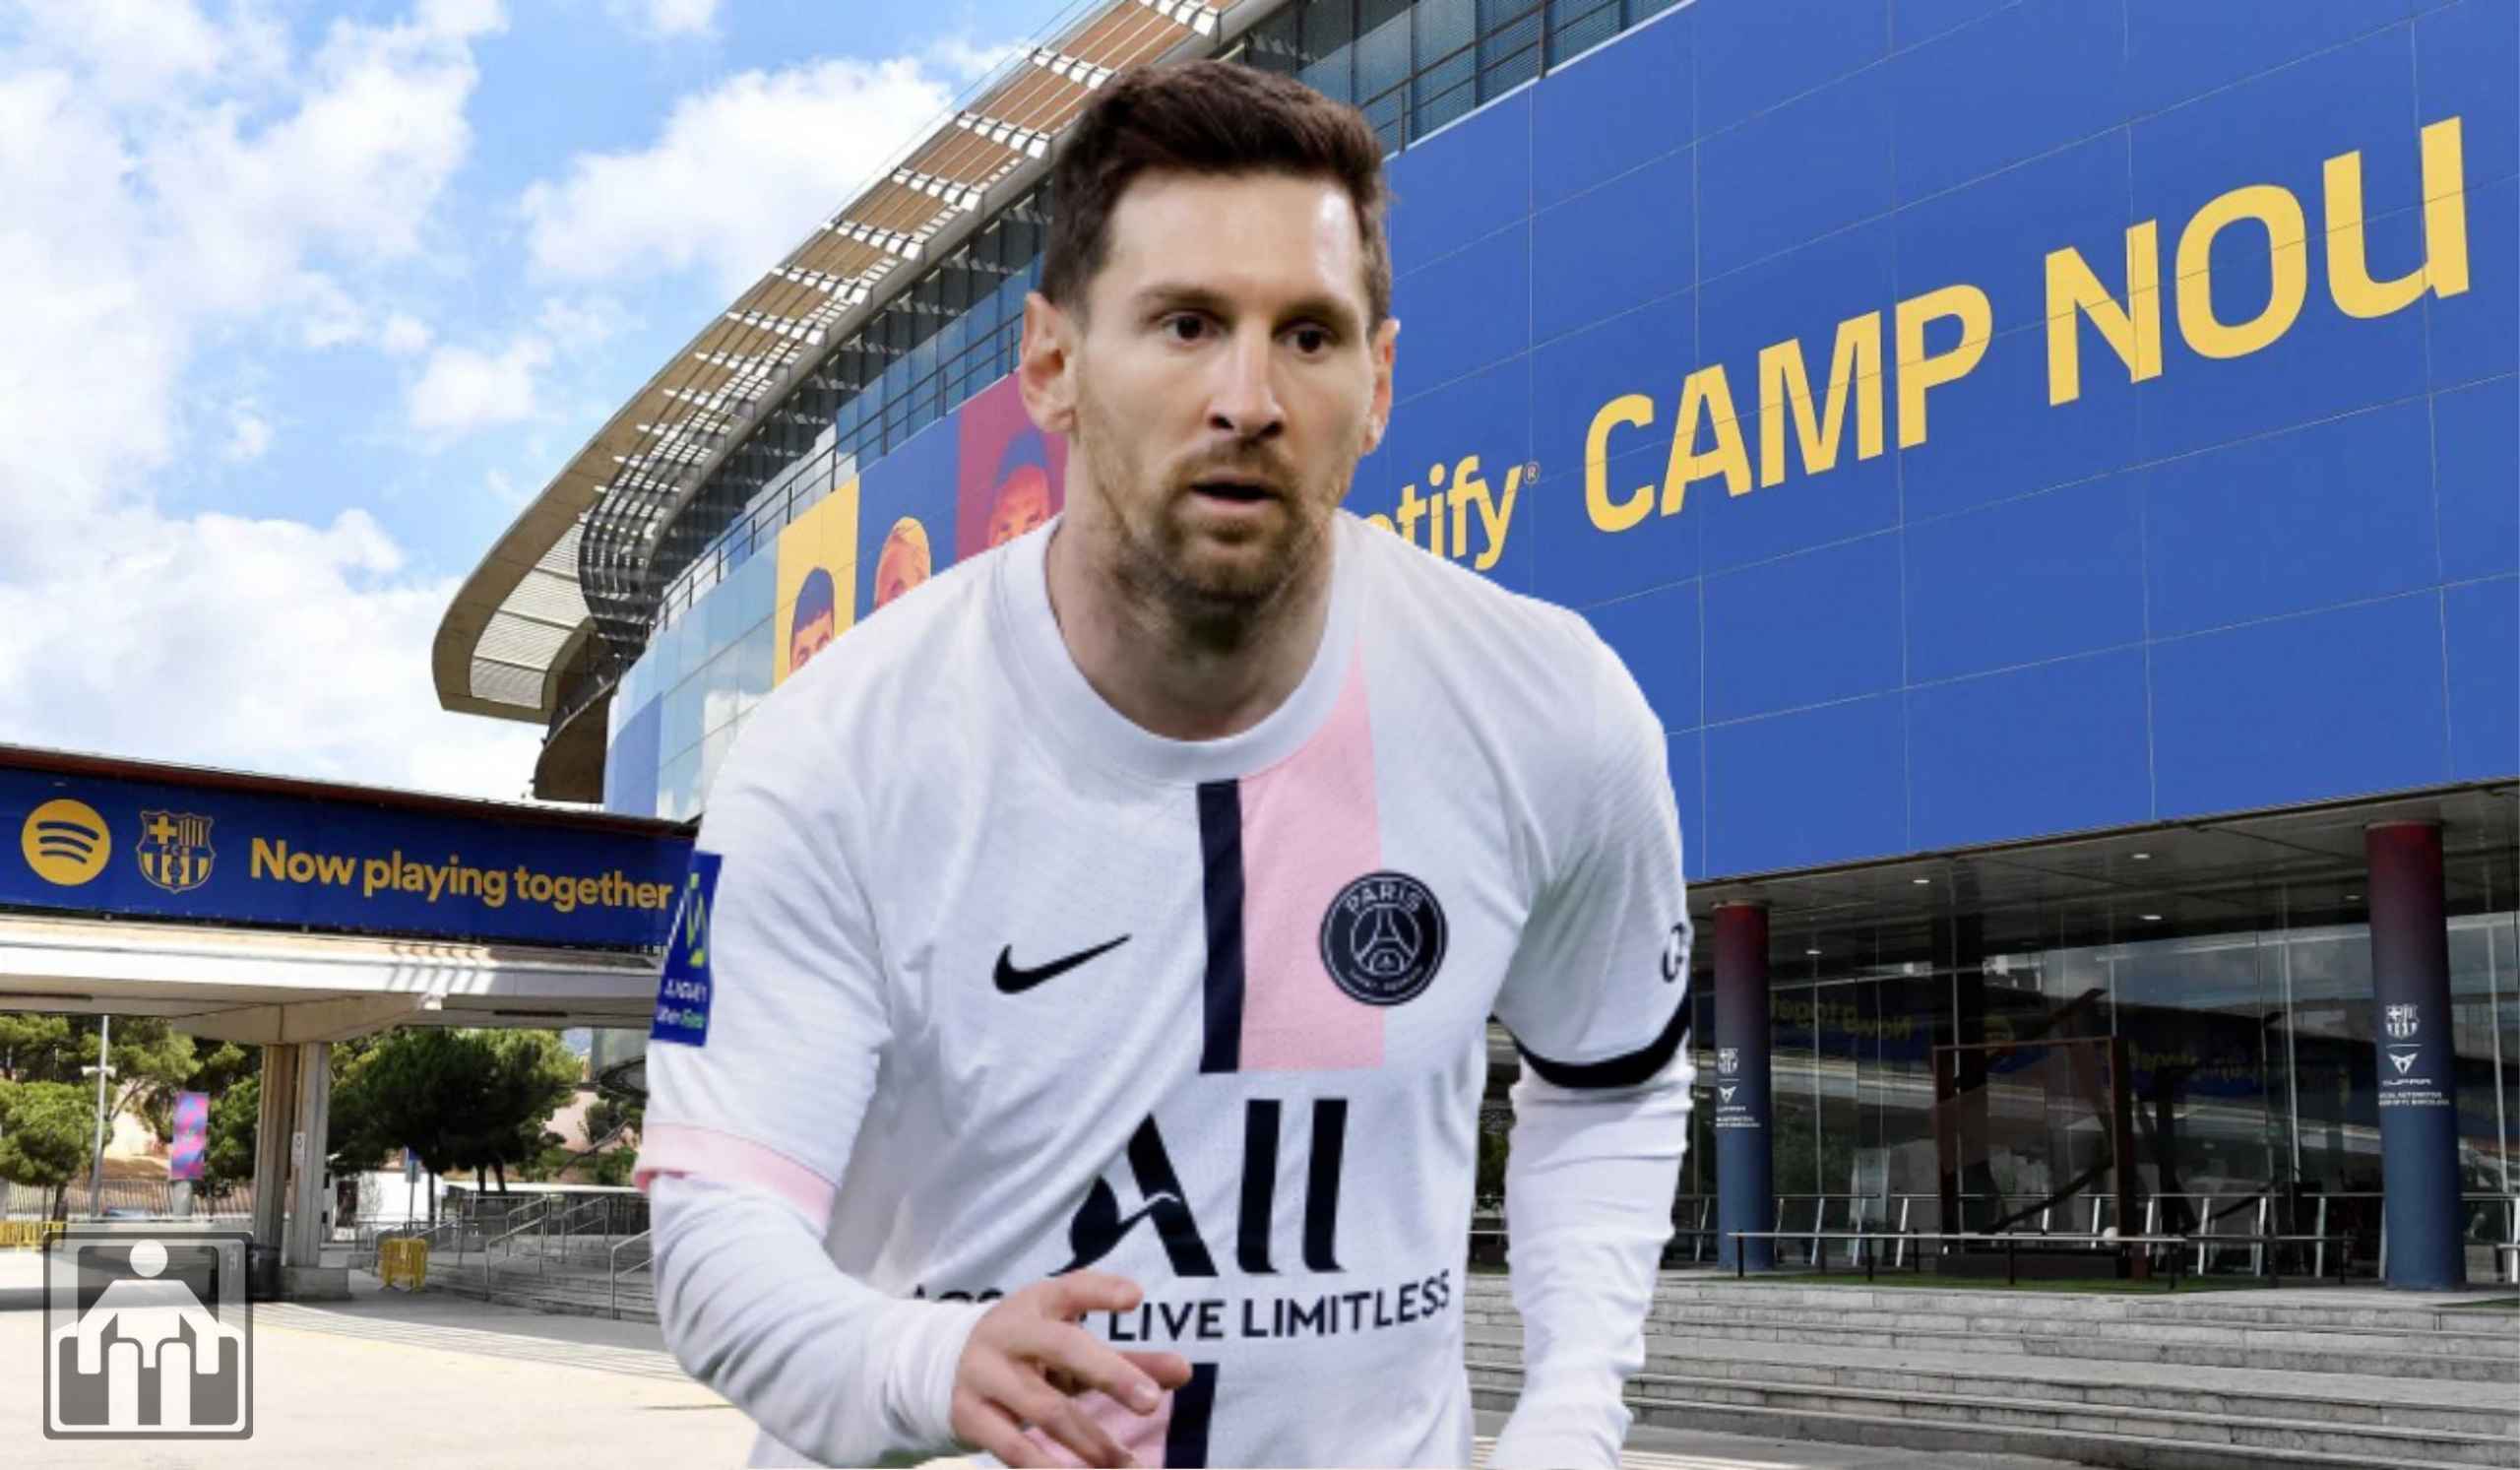  The image shows a photo of Lionel Messi wearing a Paris Saint-Germain jersey with Spotify Camp Nou stadium in the background.